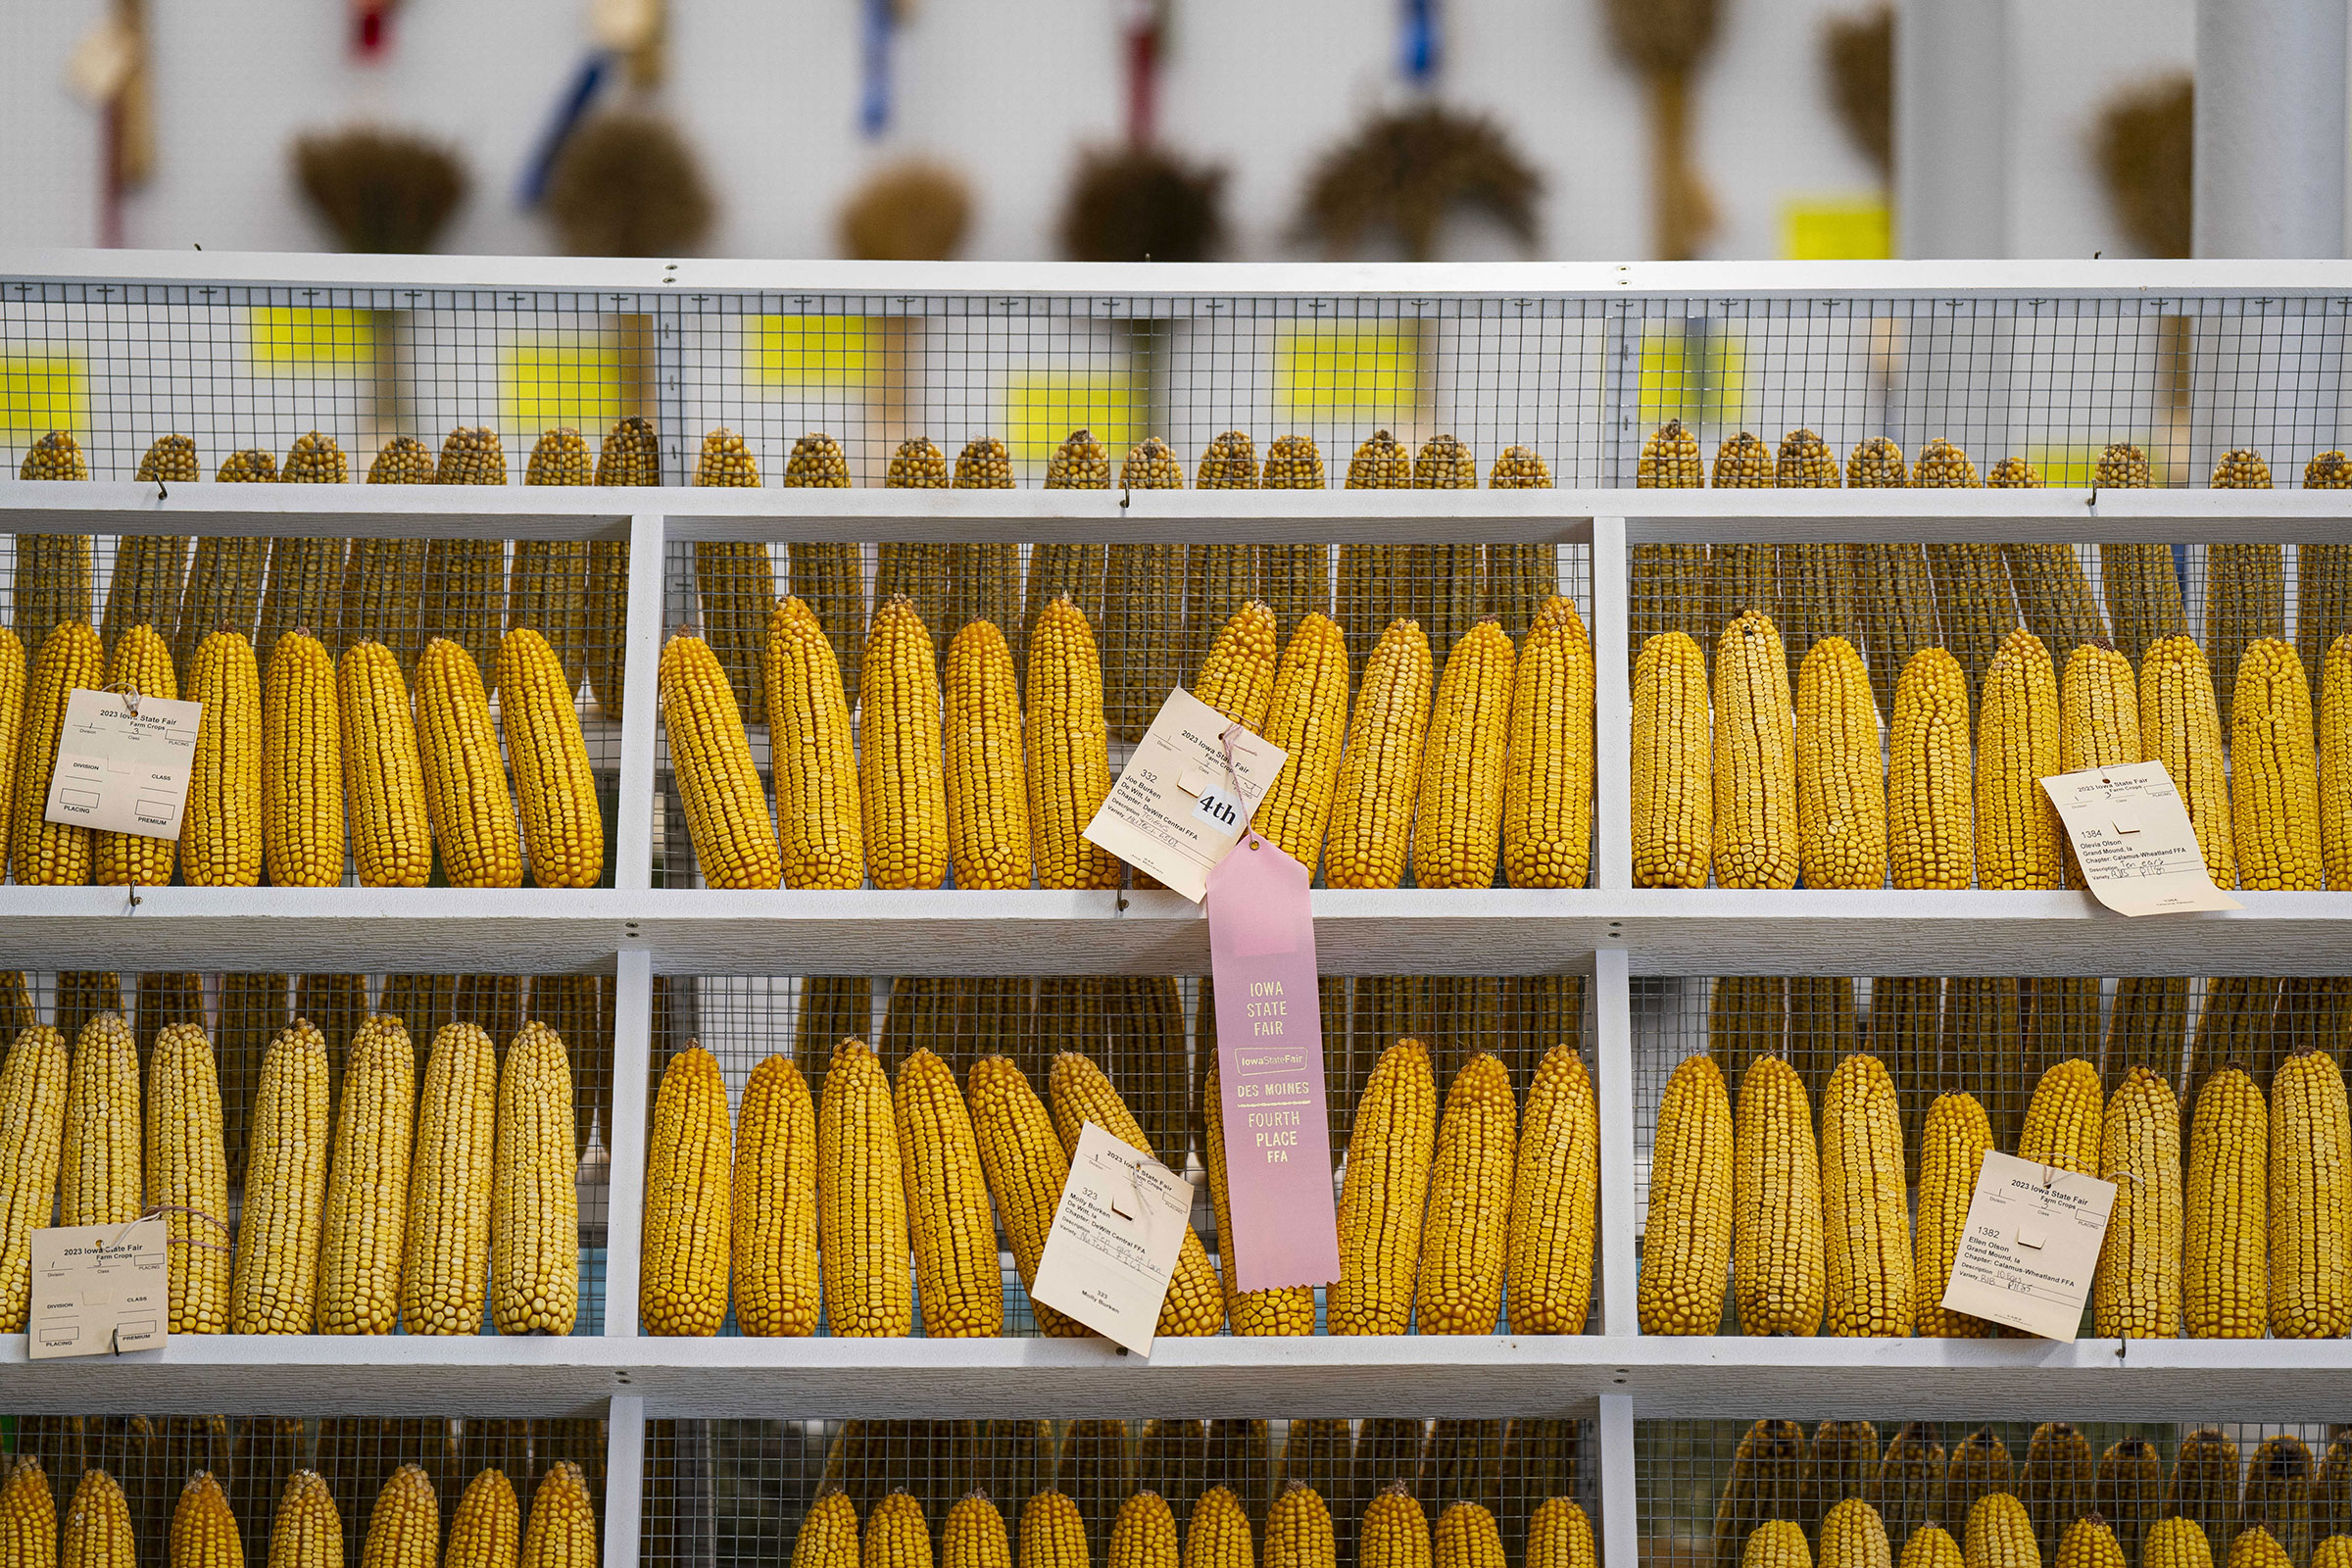 Cobs of corn are judged in the agriculture building on Aug. 10. (Al Drago—Bloomberg/Getty Images)